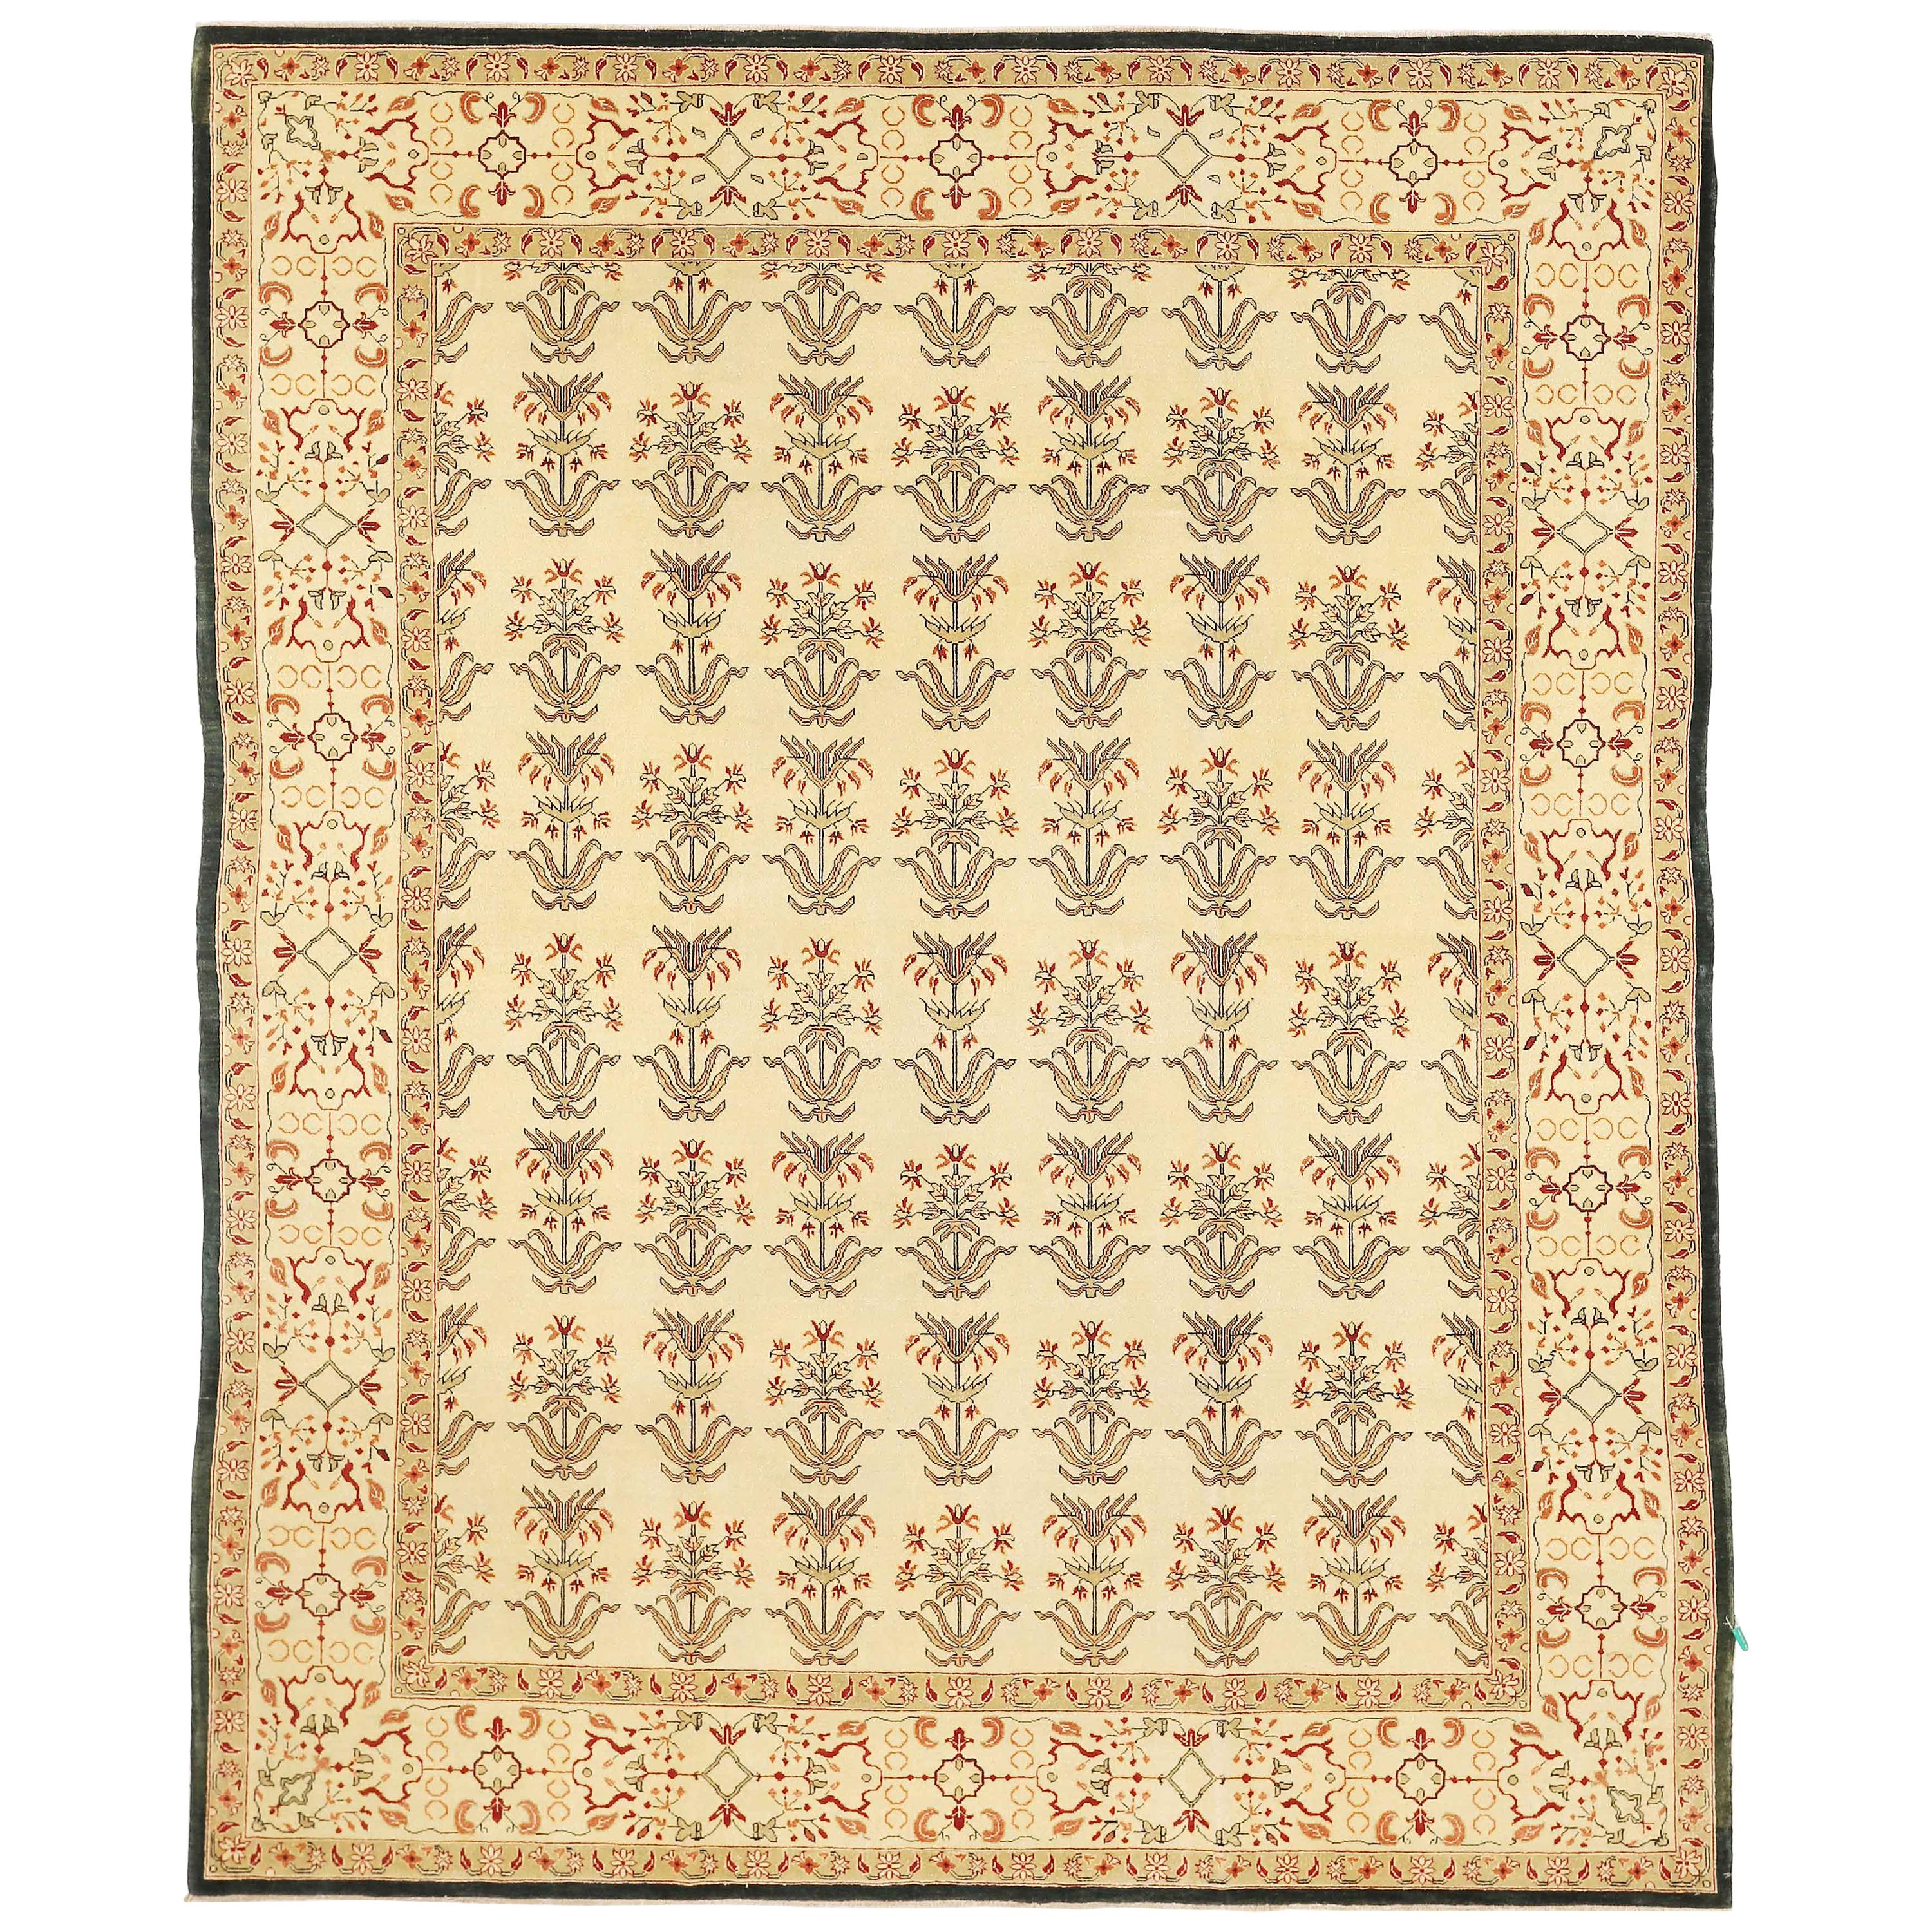 Contemporary Turkish Agra Rug with Beige and Brown Botanical Details